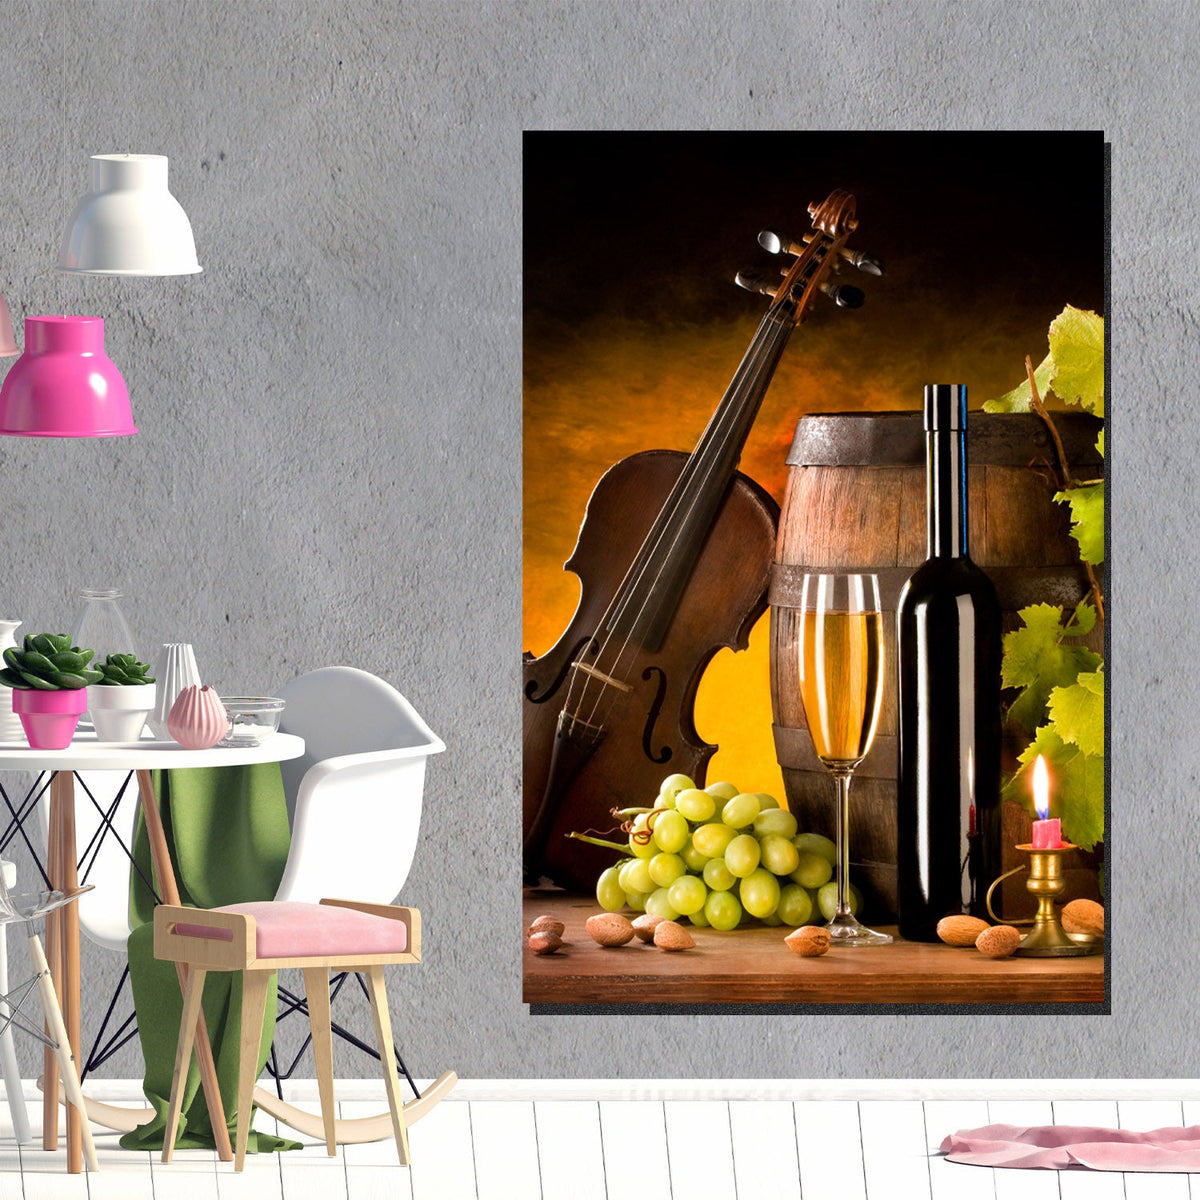 https://cdn.shopify.com/s/files/1/0387/9986/8044/products/WineandviolinCanvasPrintStretched-1.jpg